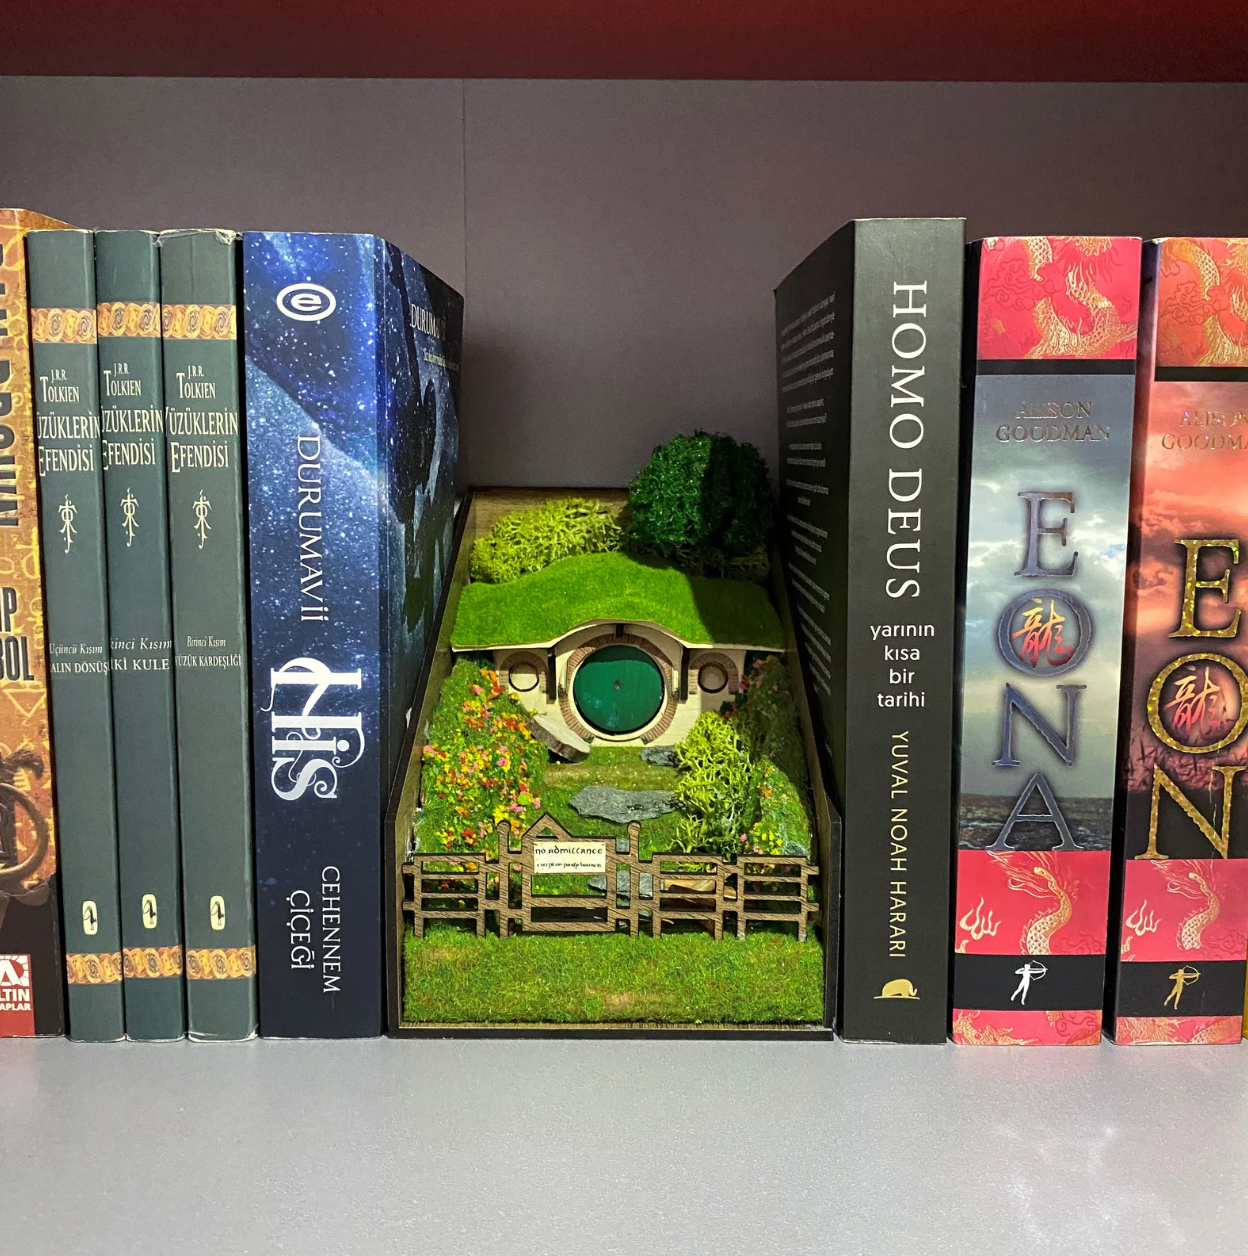 The Lord of the Rings Book Nook/Lord of the Rings Shelf Insert/DIY